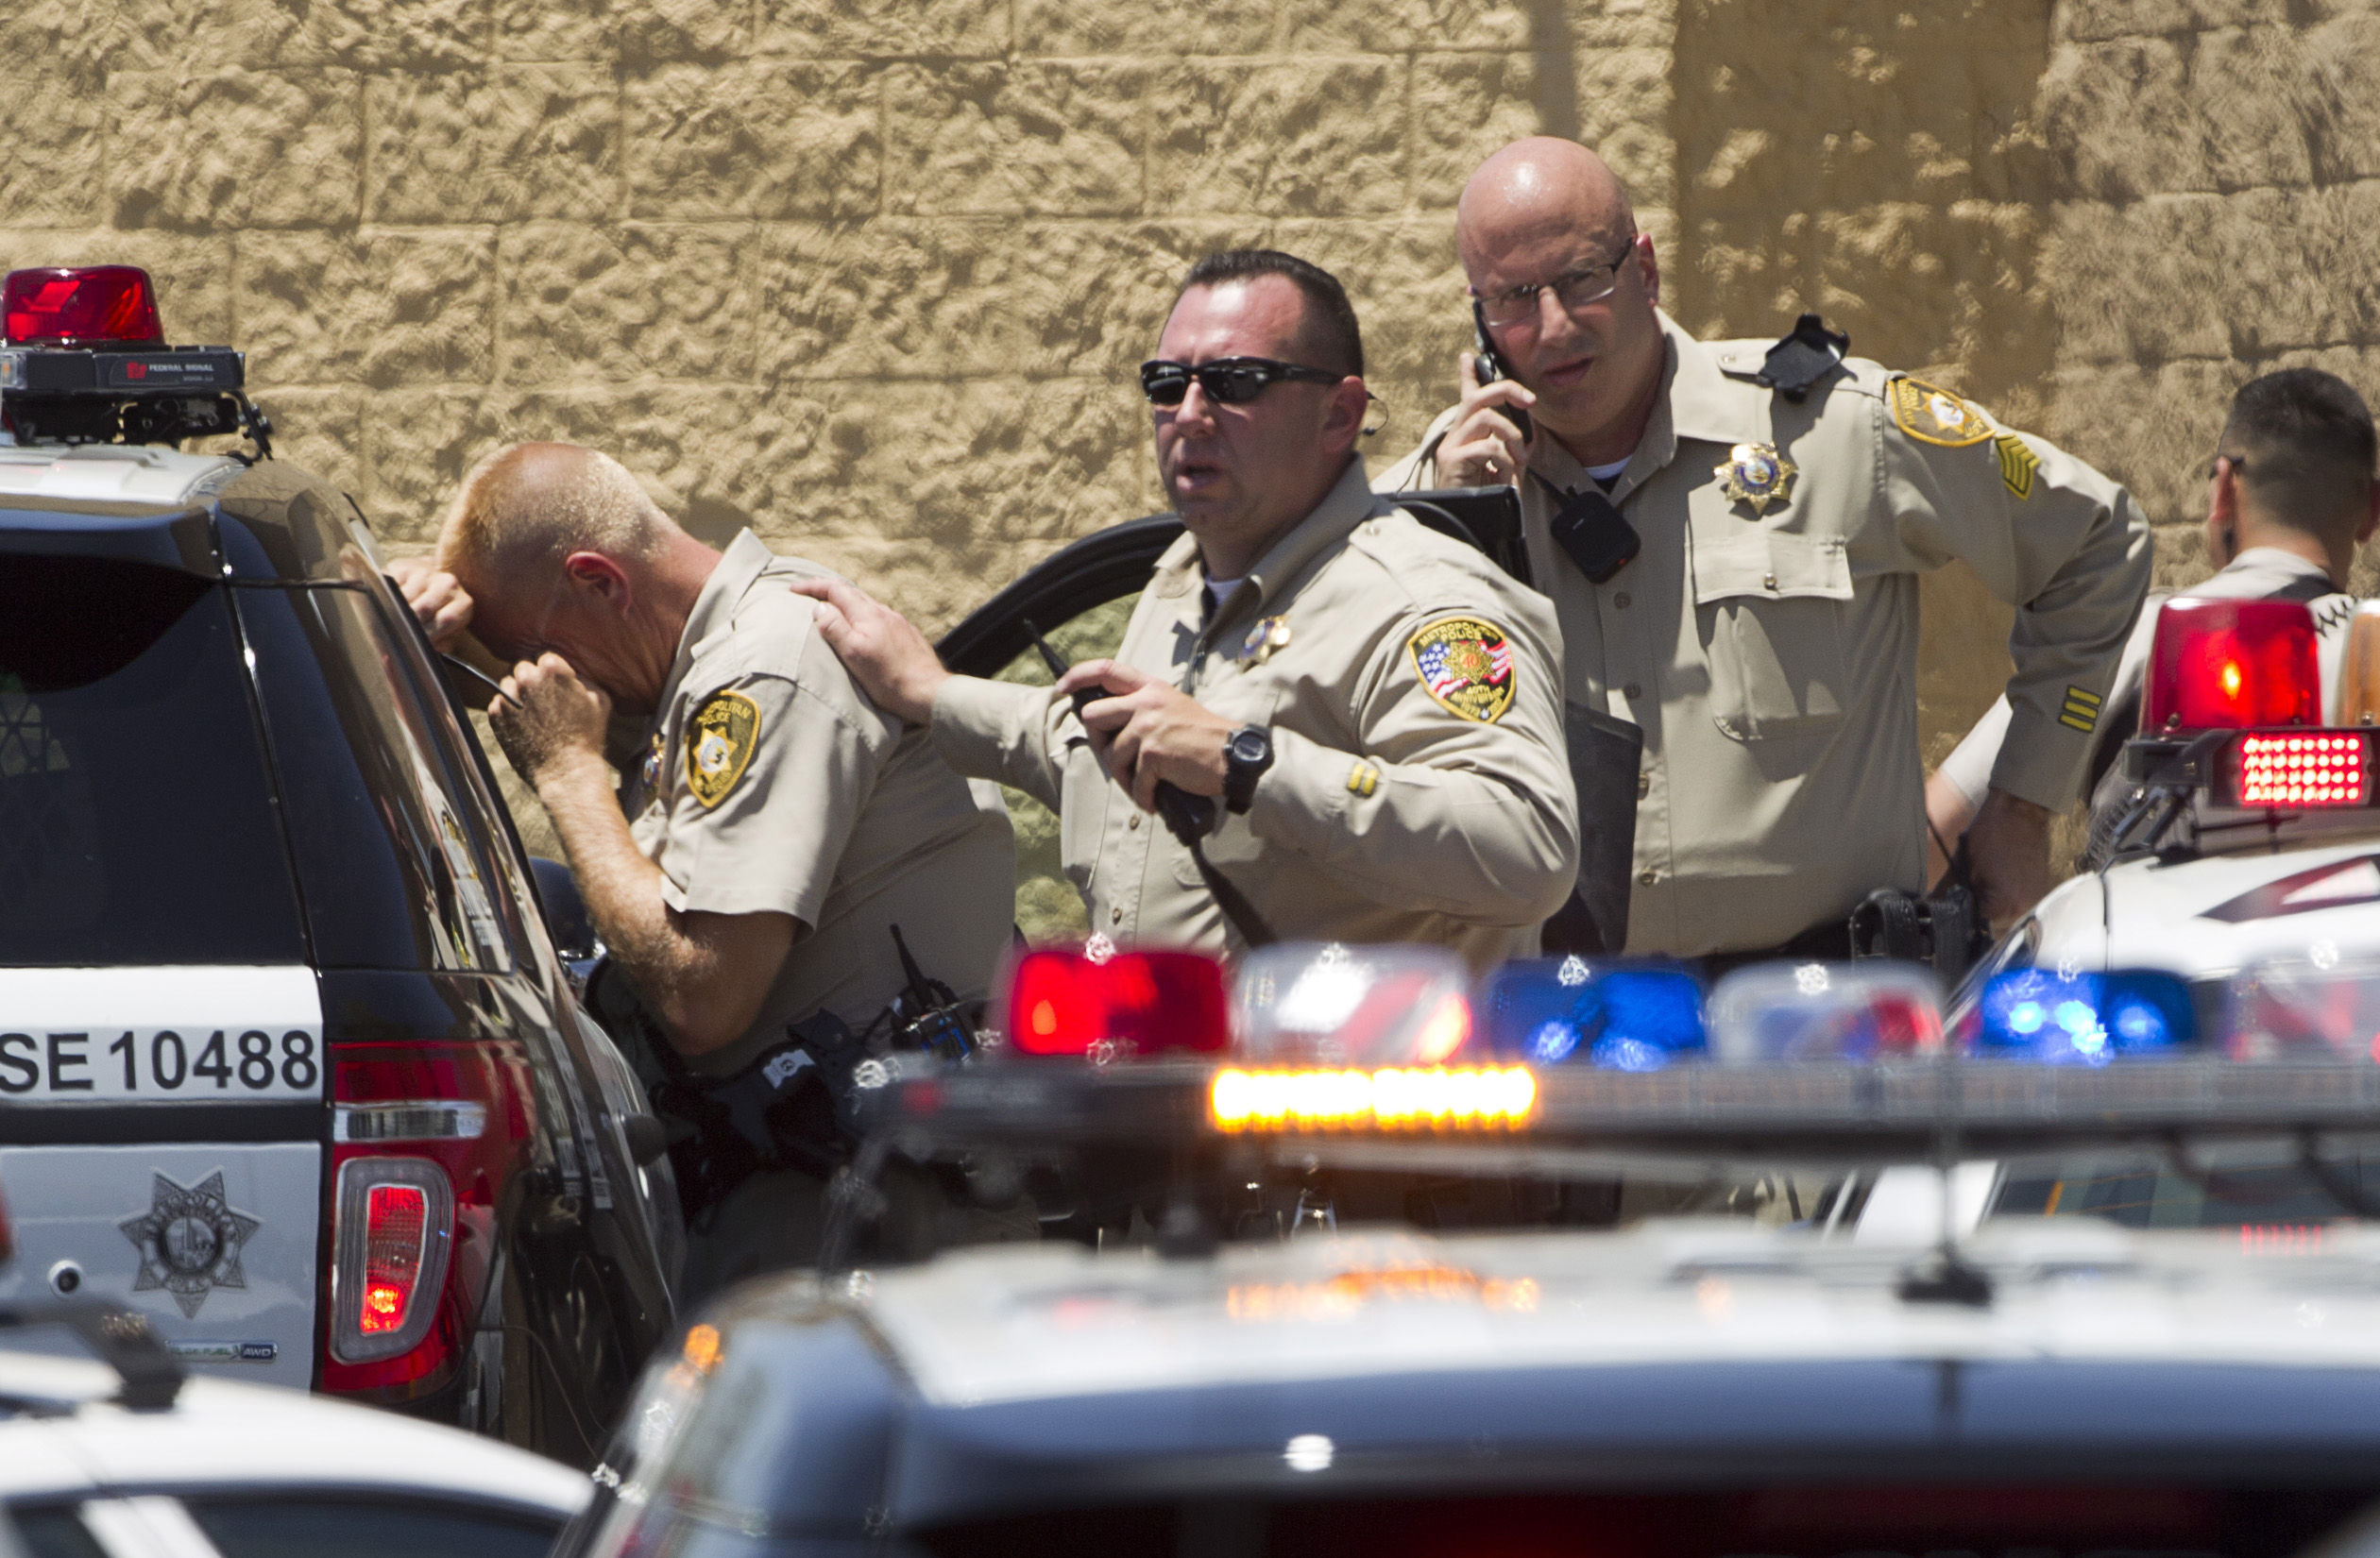 Metro Police officers are shown outside a Wal-Mart after a shooting in Las Vegas